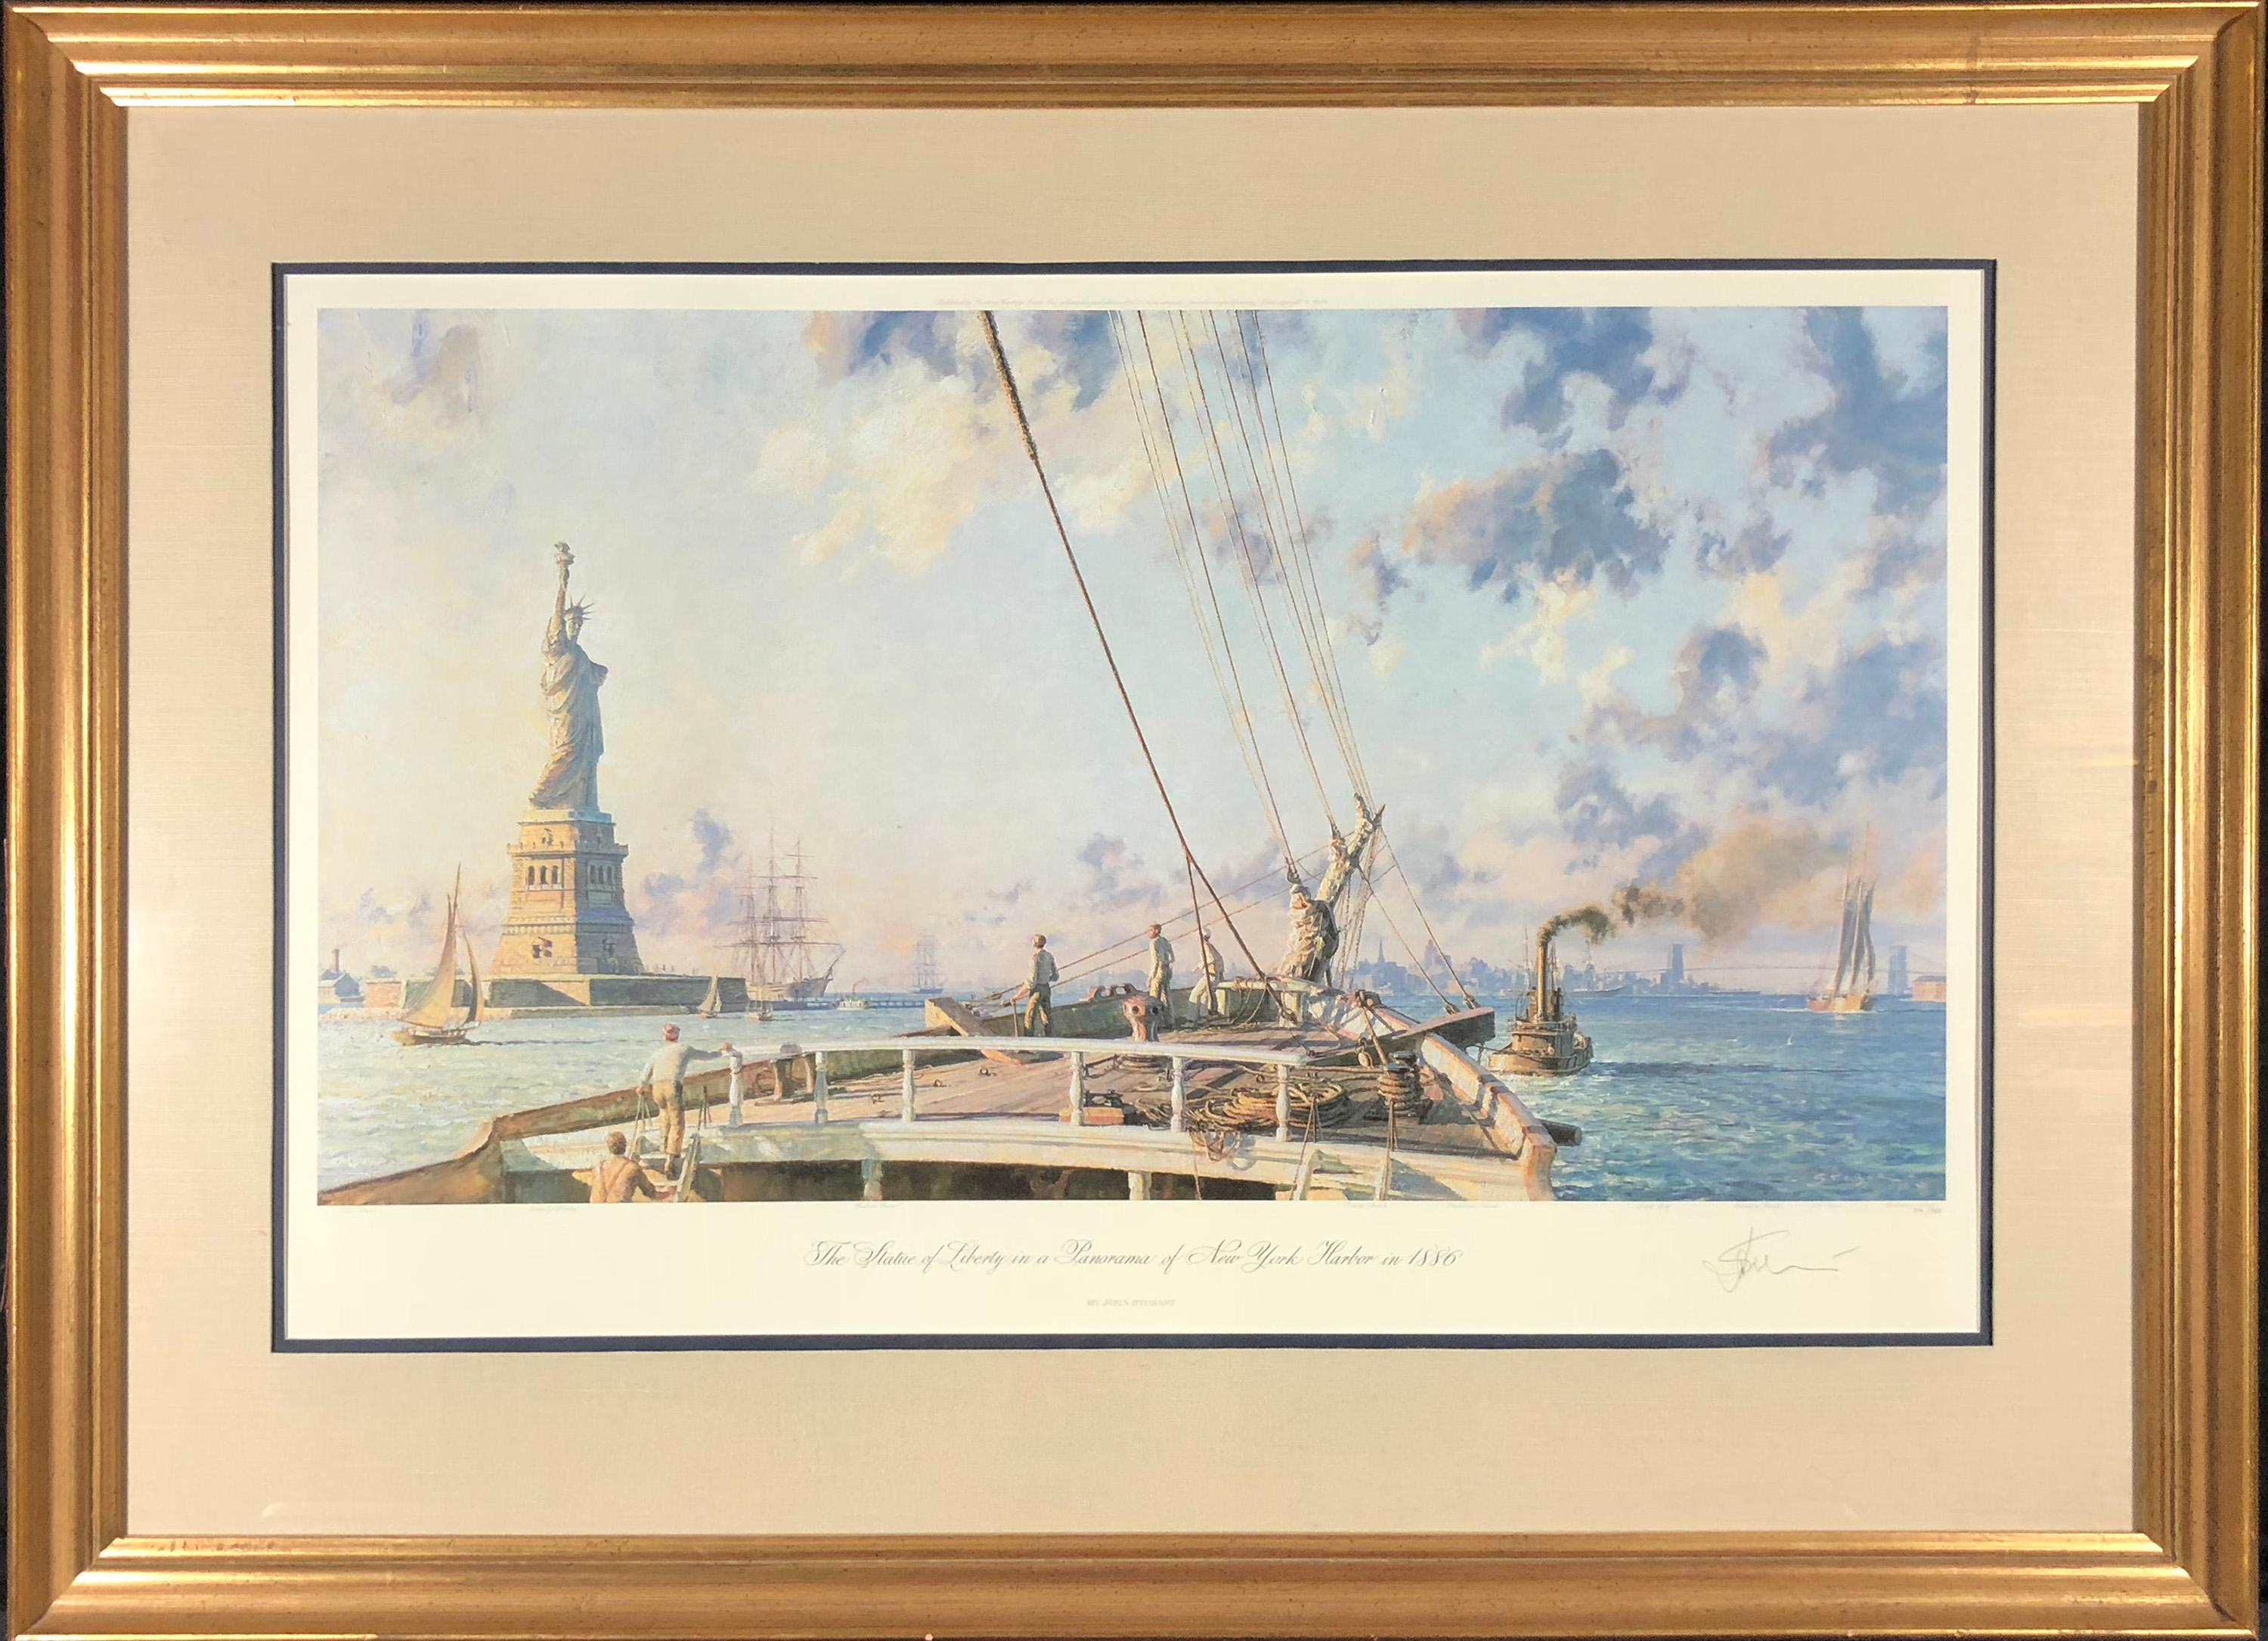 The Statue of Liberty in a Panorama of New York City in 1886 - Print by John Stobart